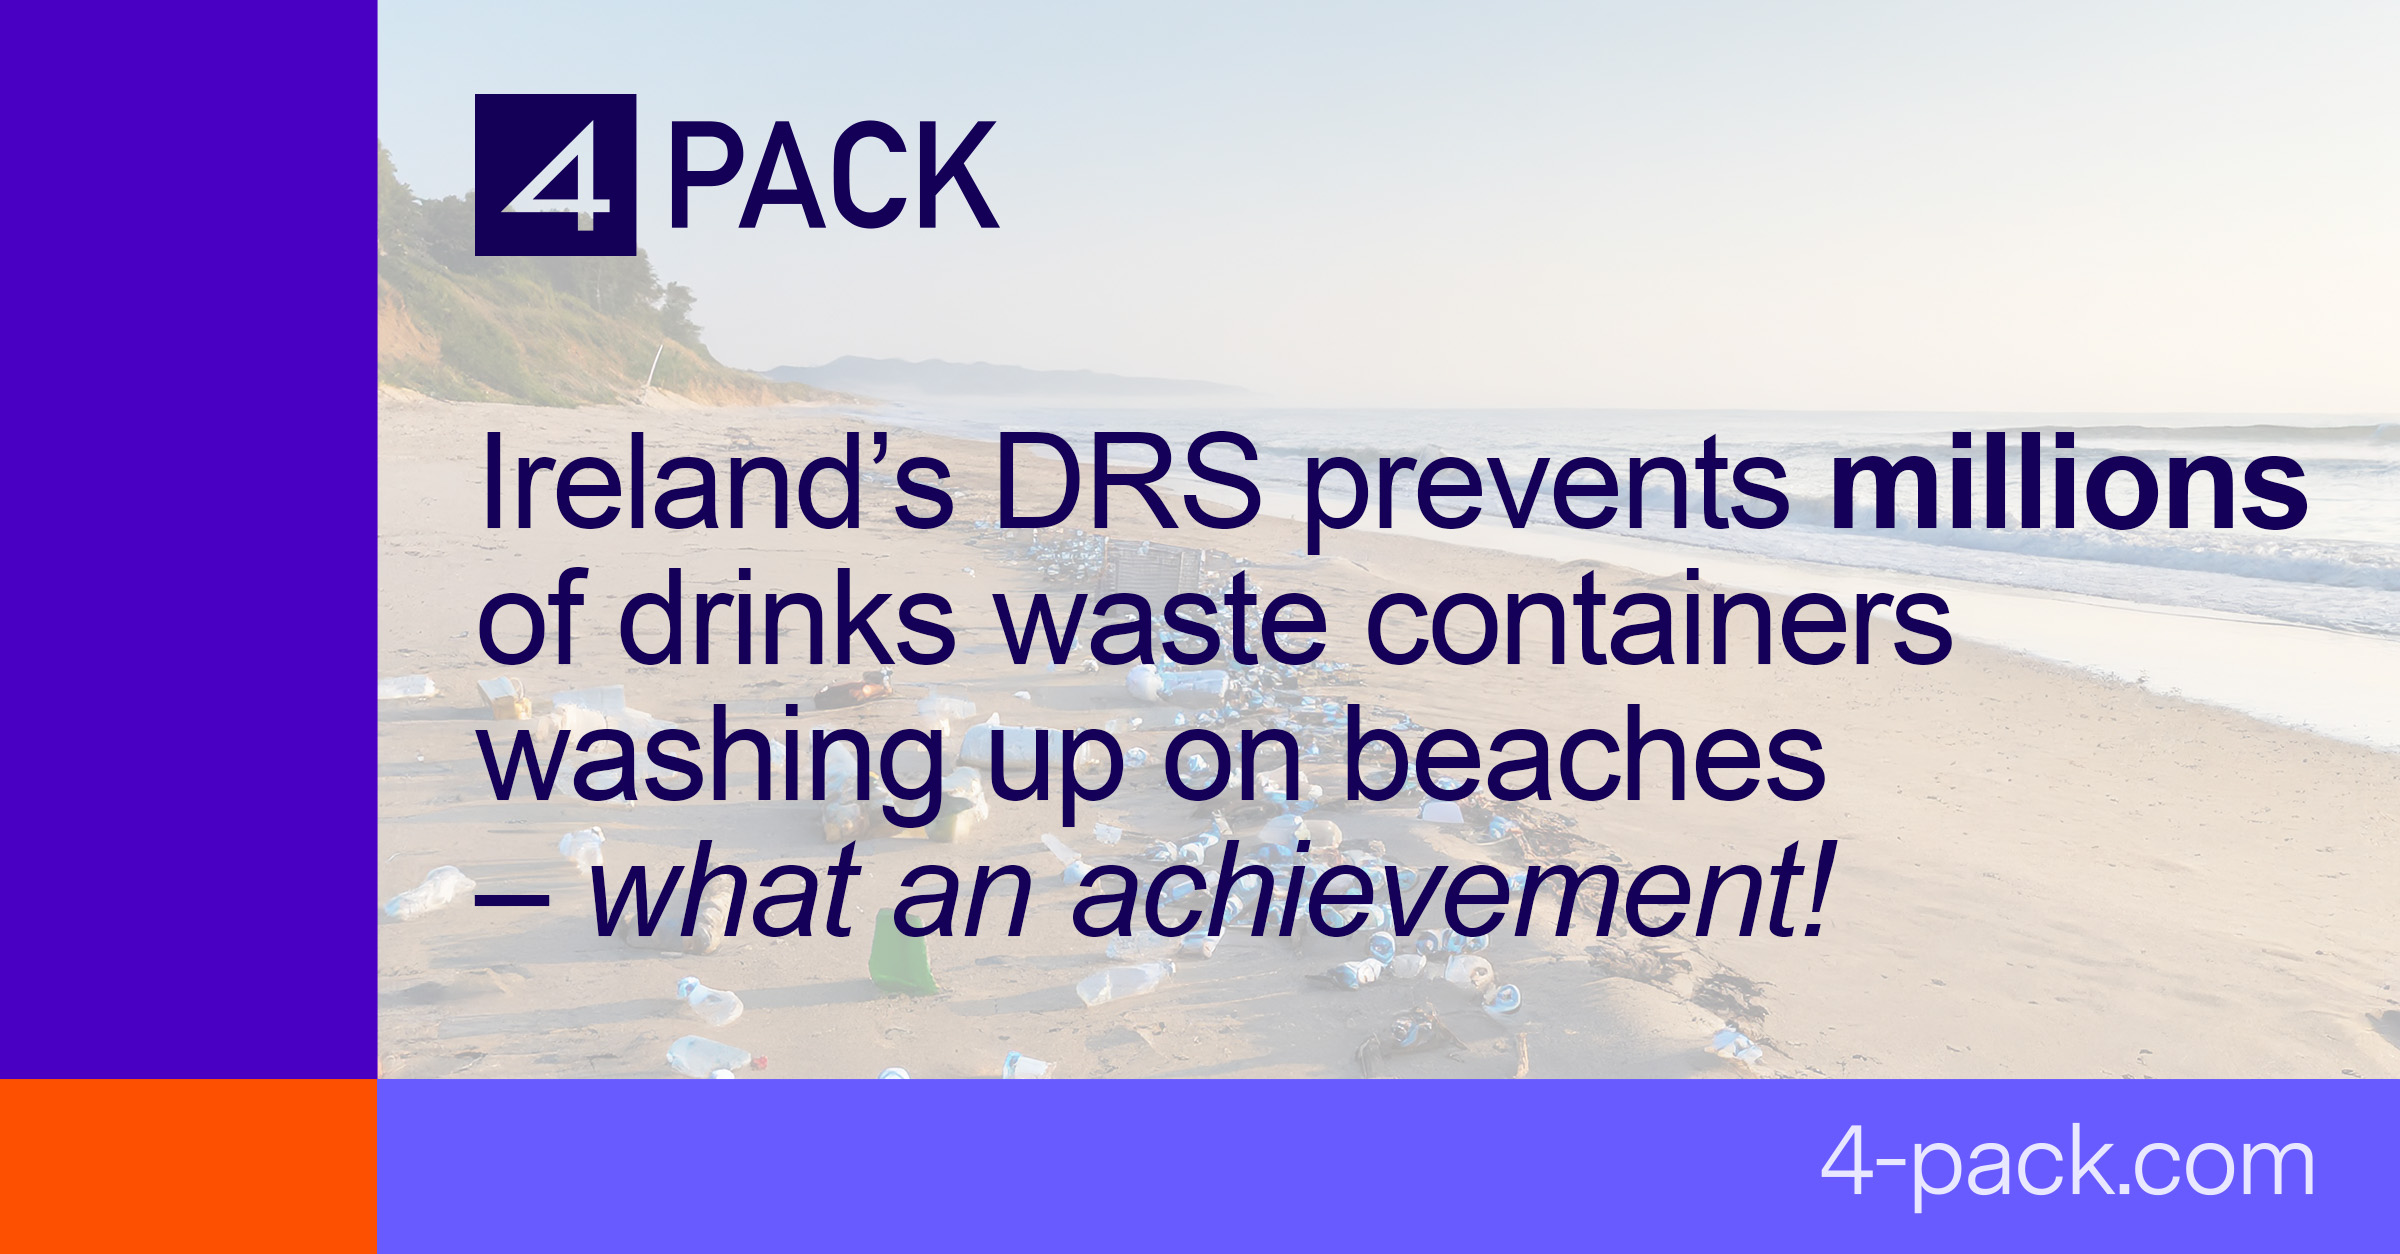 Irish Deposit Return Scheme keeps a million cans and bottles a day off beaches and landfill